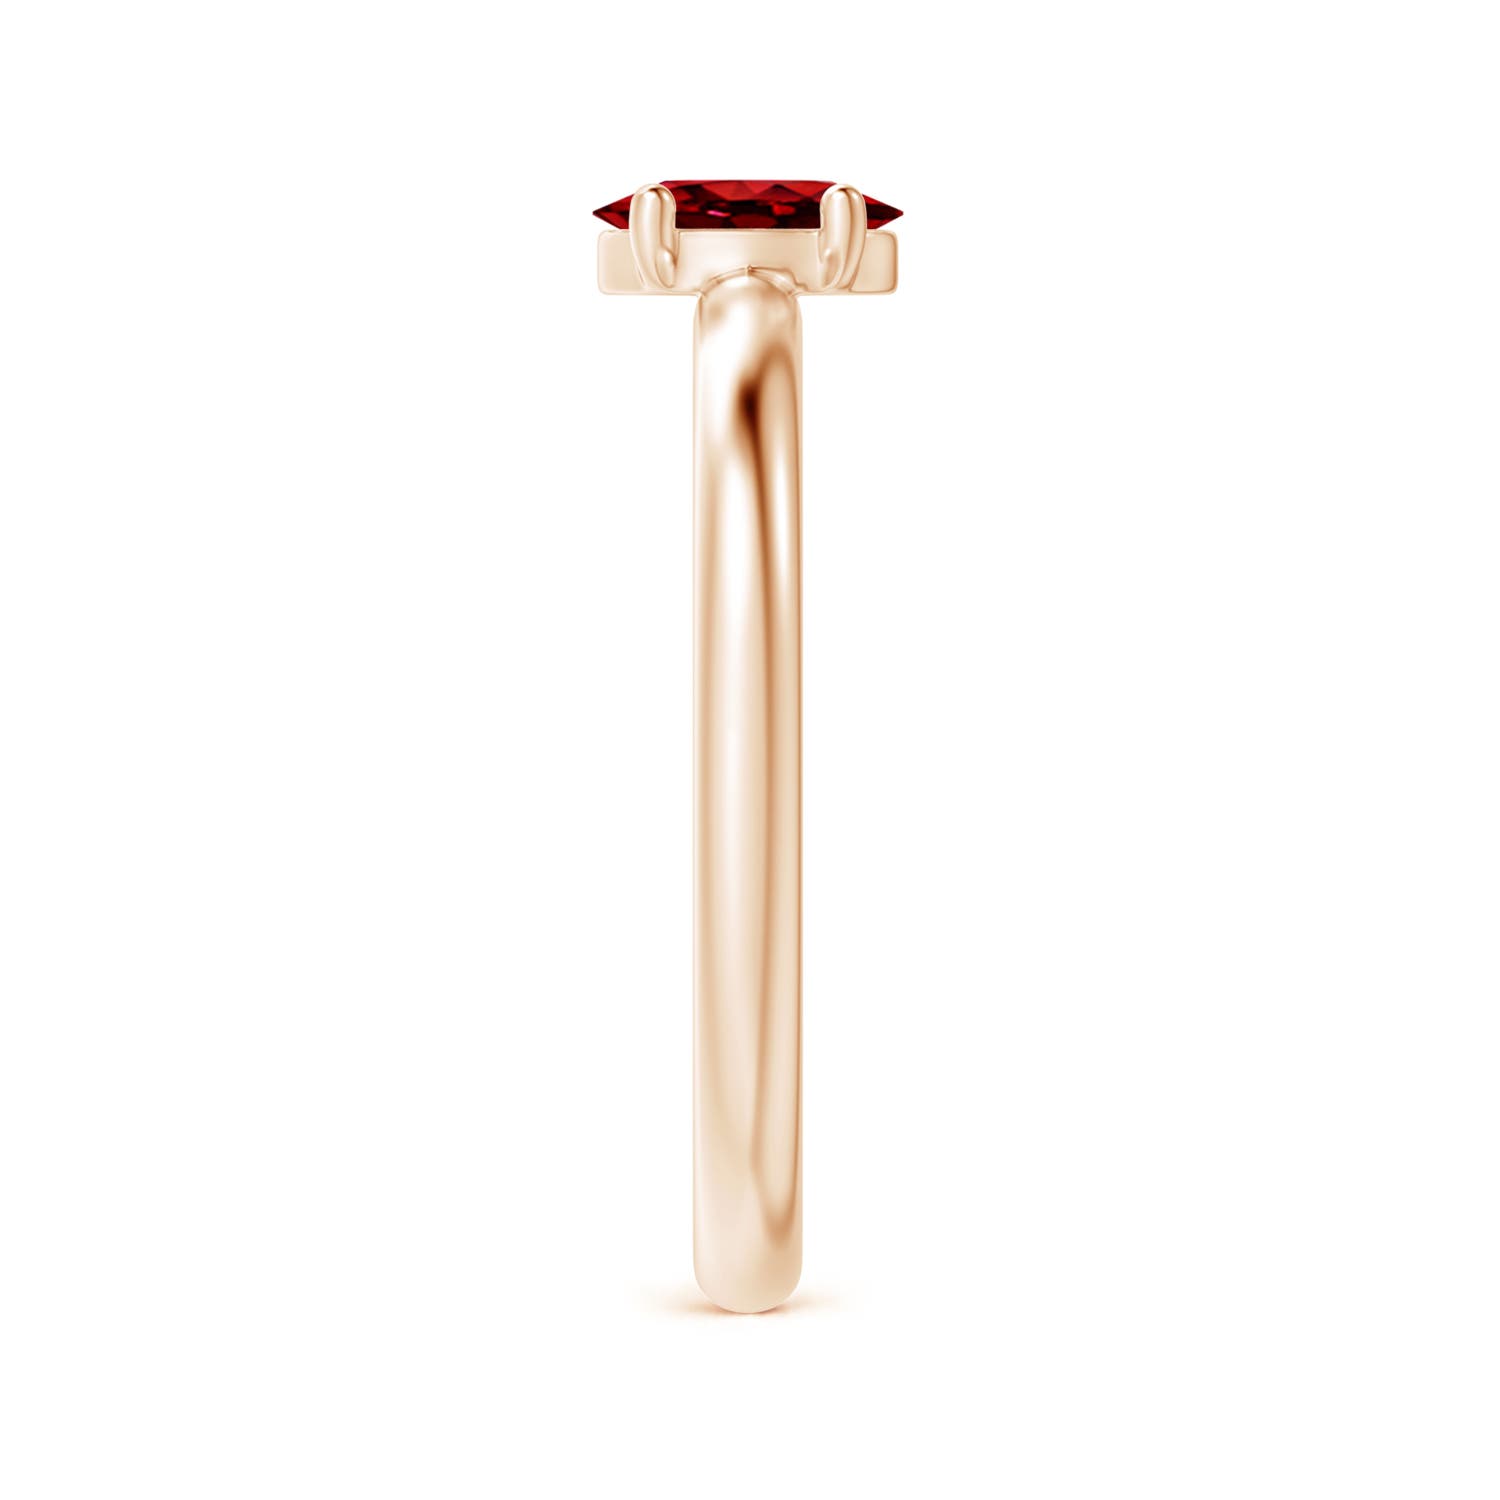 AAAA - Ruby / 0.6 CT / 14 KT Rose Gold